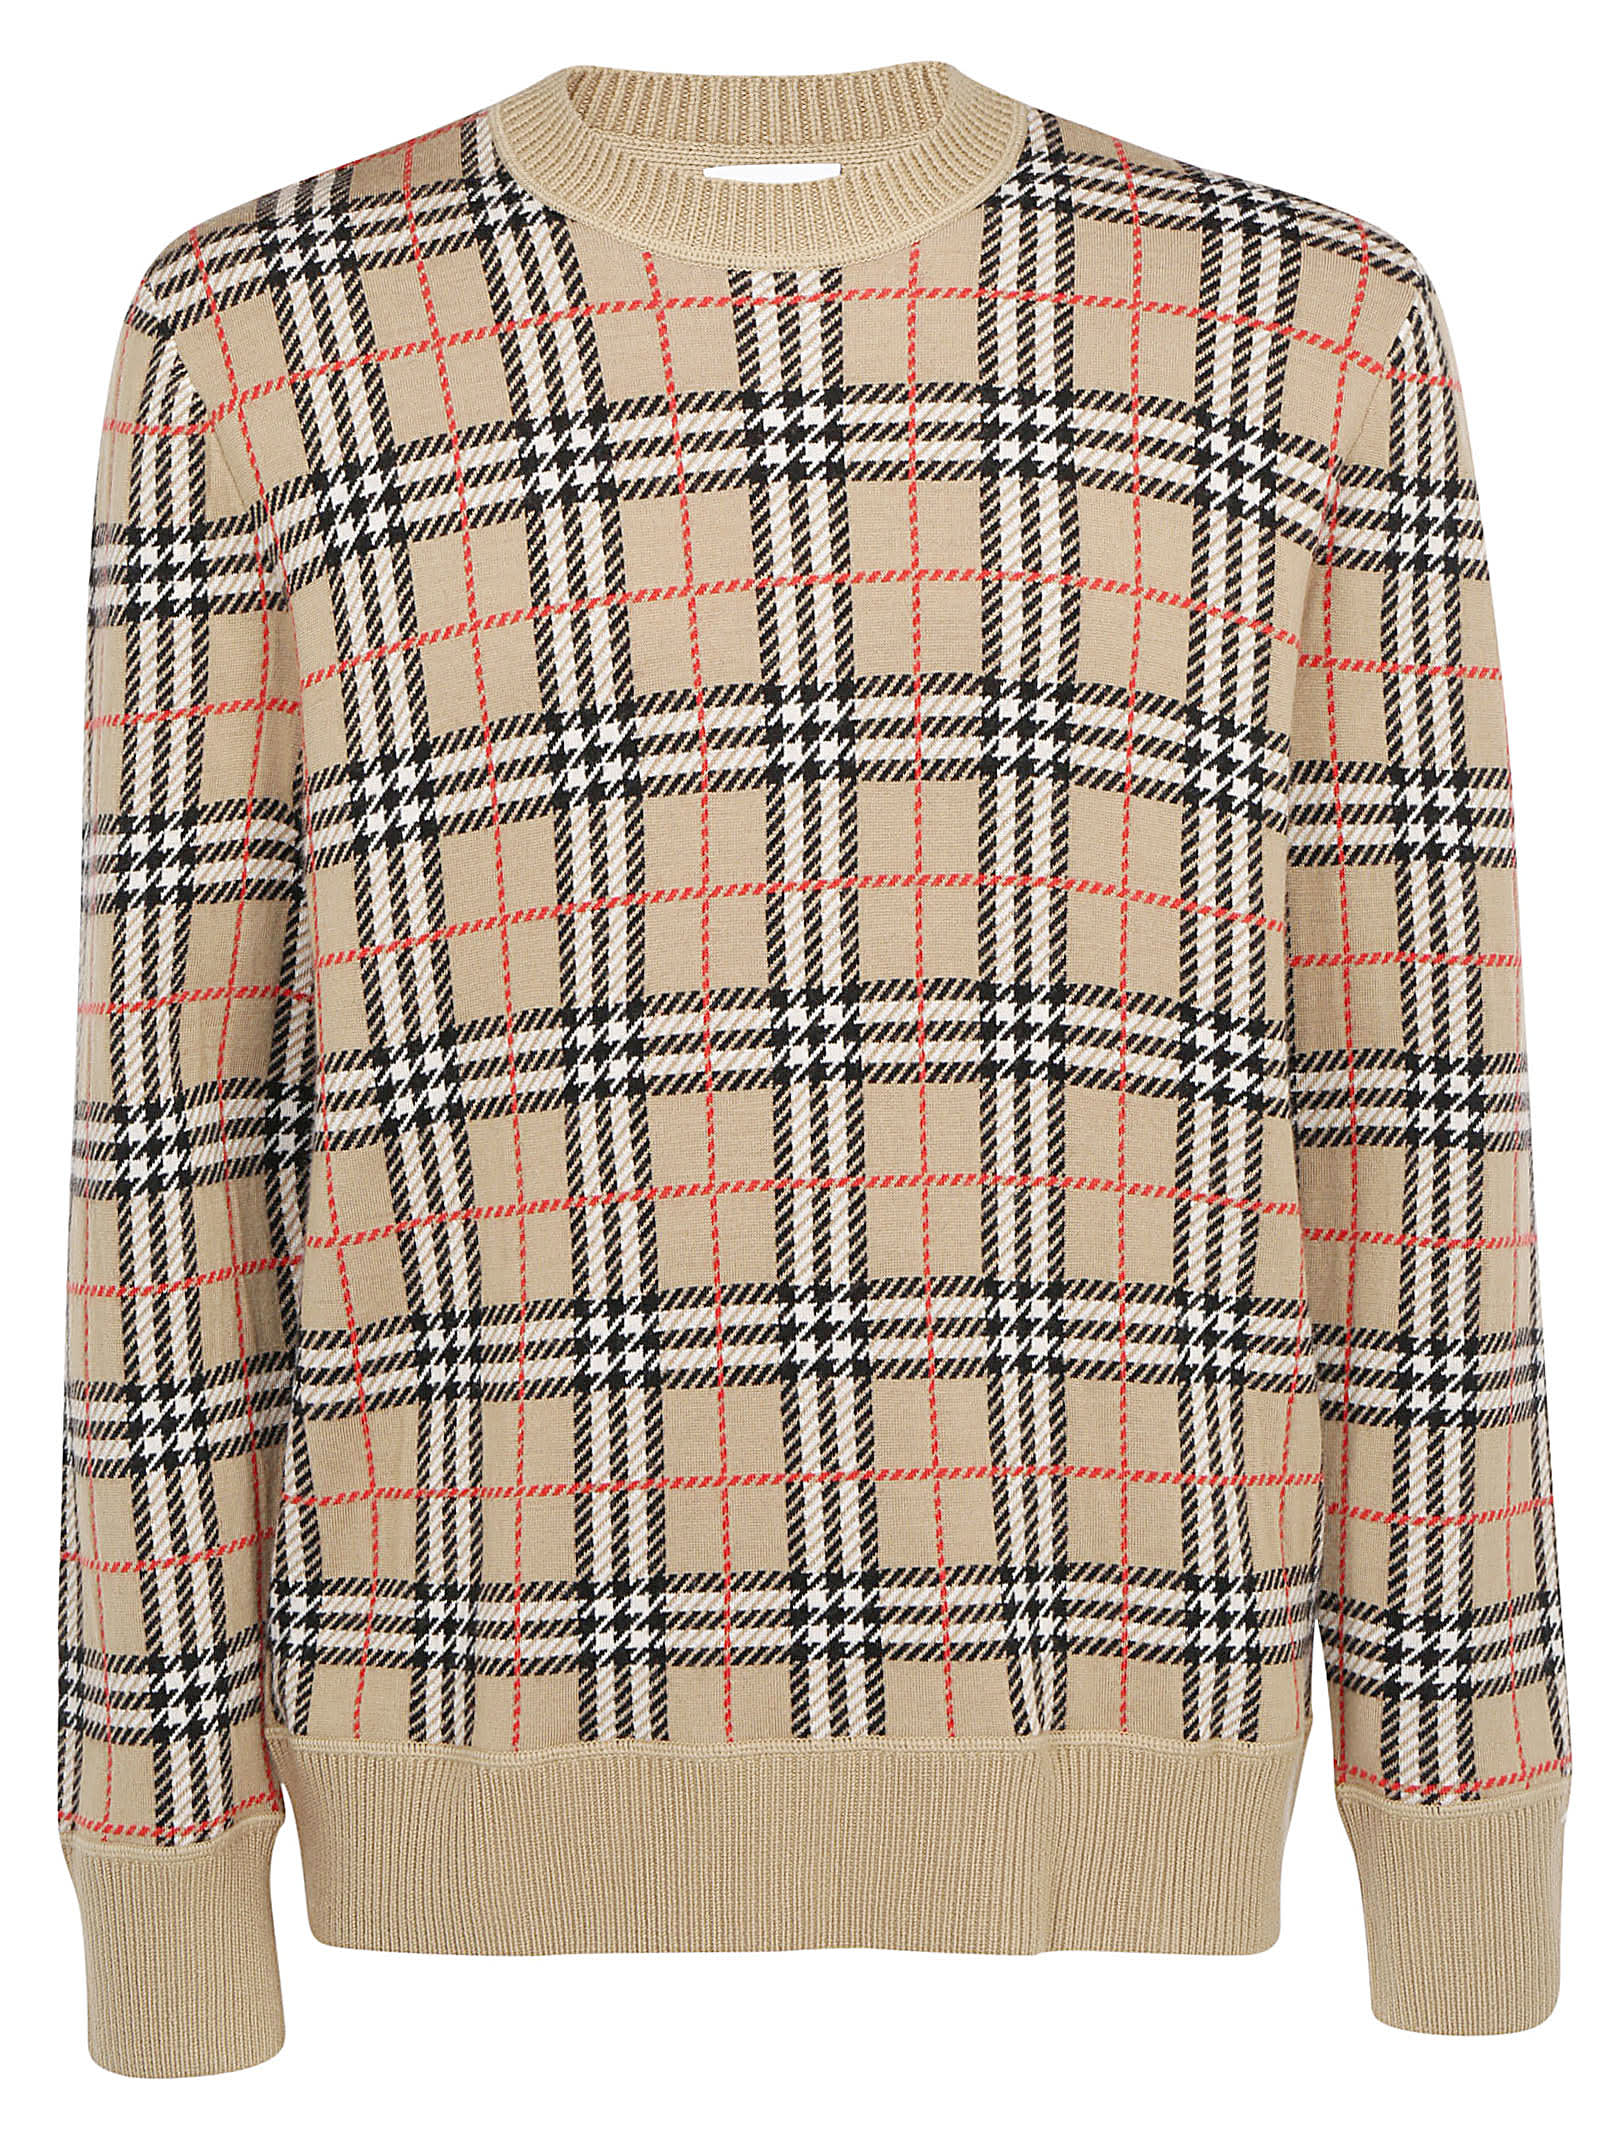 burberry sweater for sale Online 